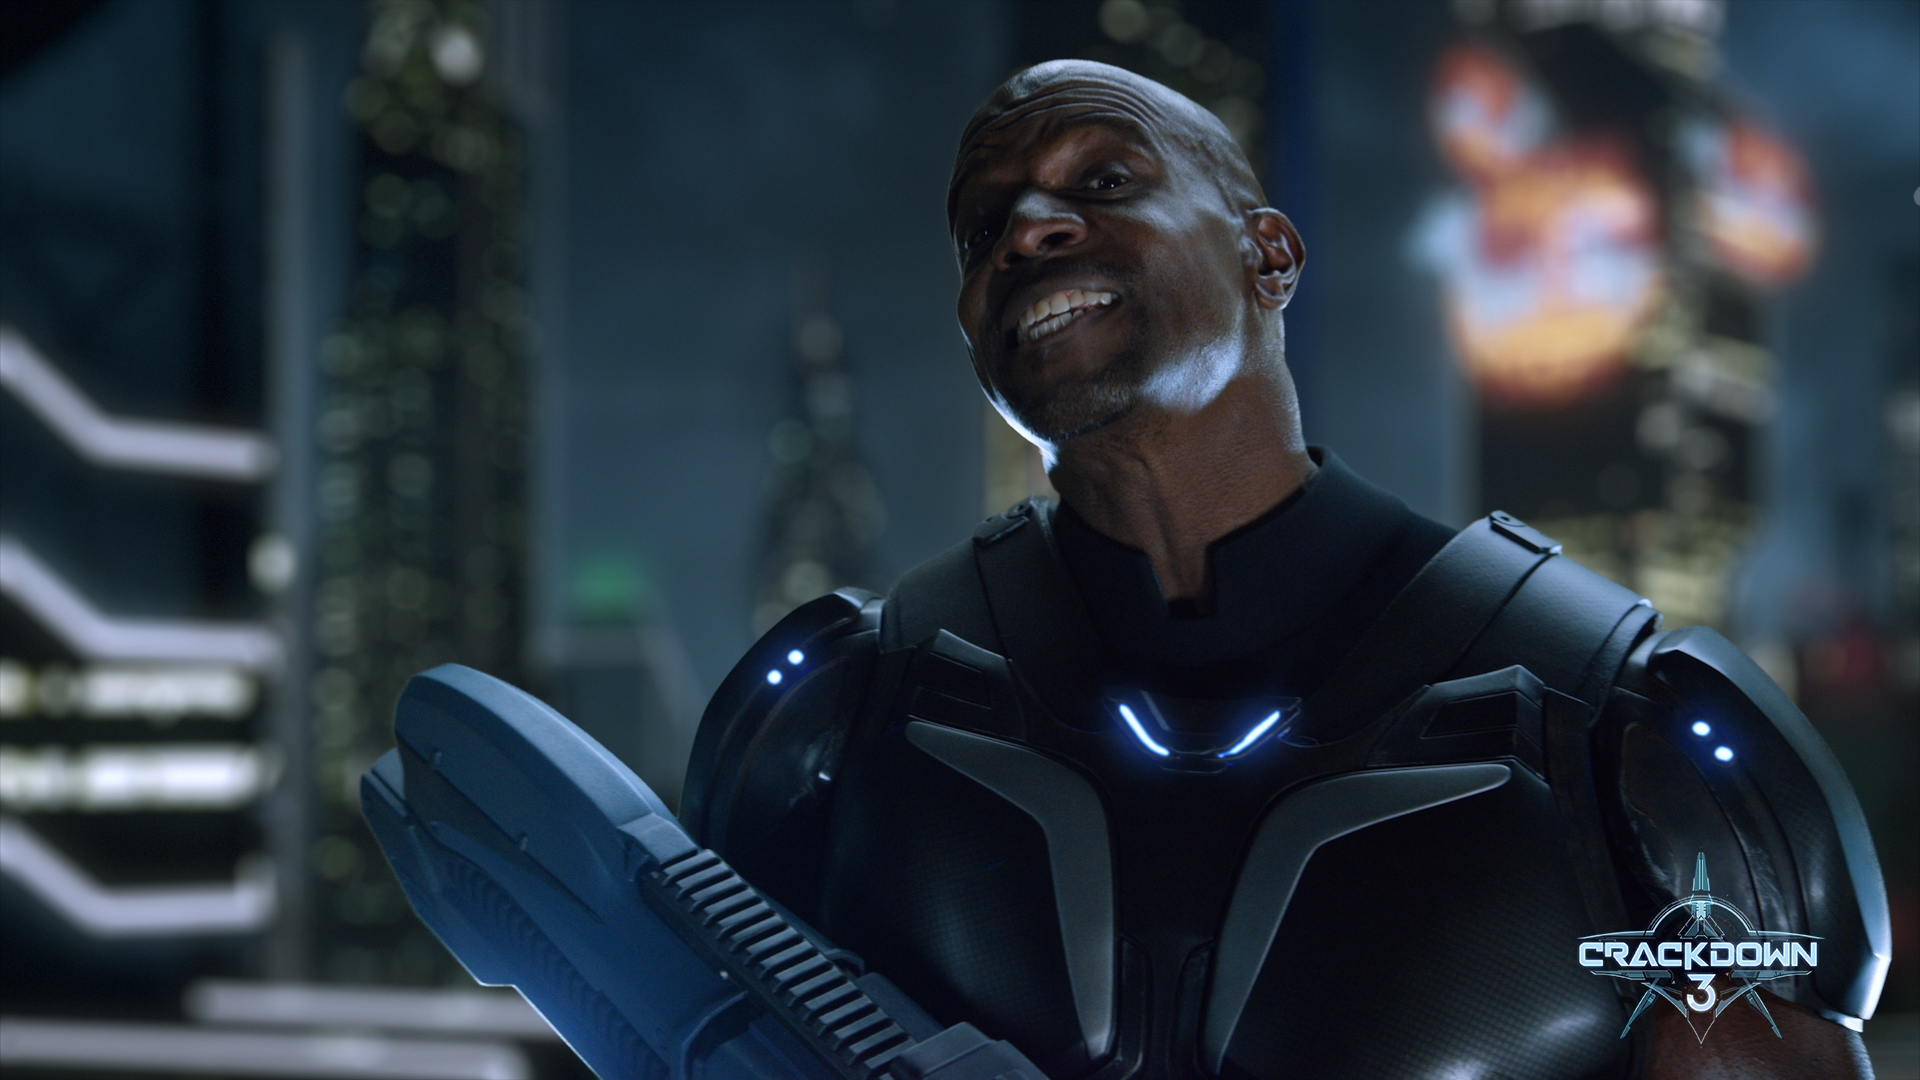 Terry Crews Crackdown 3 Video Game Thumbnail - Crackdown 3 , HD Wallpaper & Backgrounds